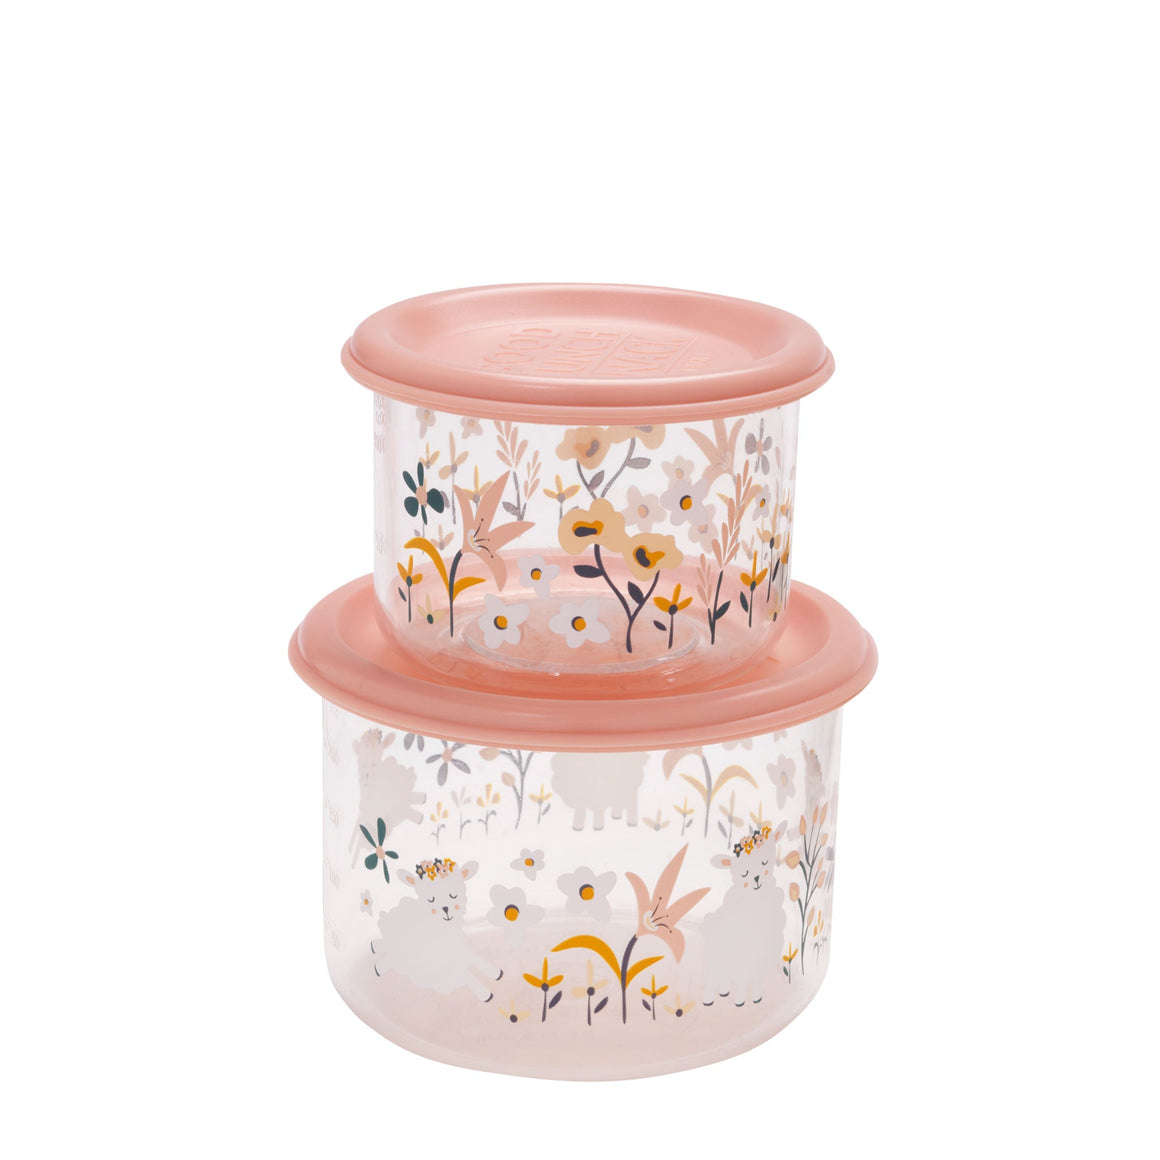 Lily The Lamb - Good Lunch Containers - Small 2 pcs.